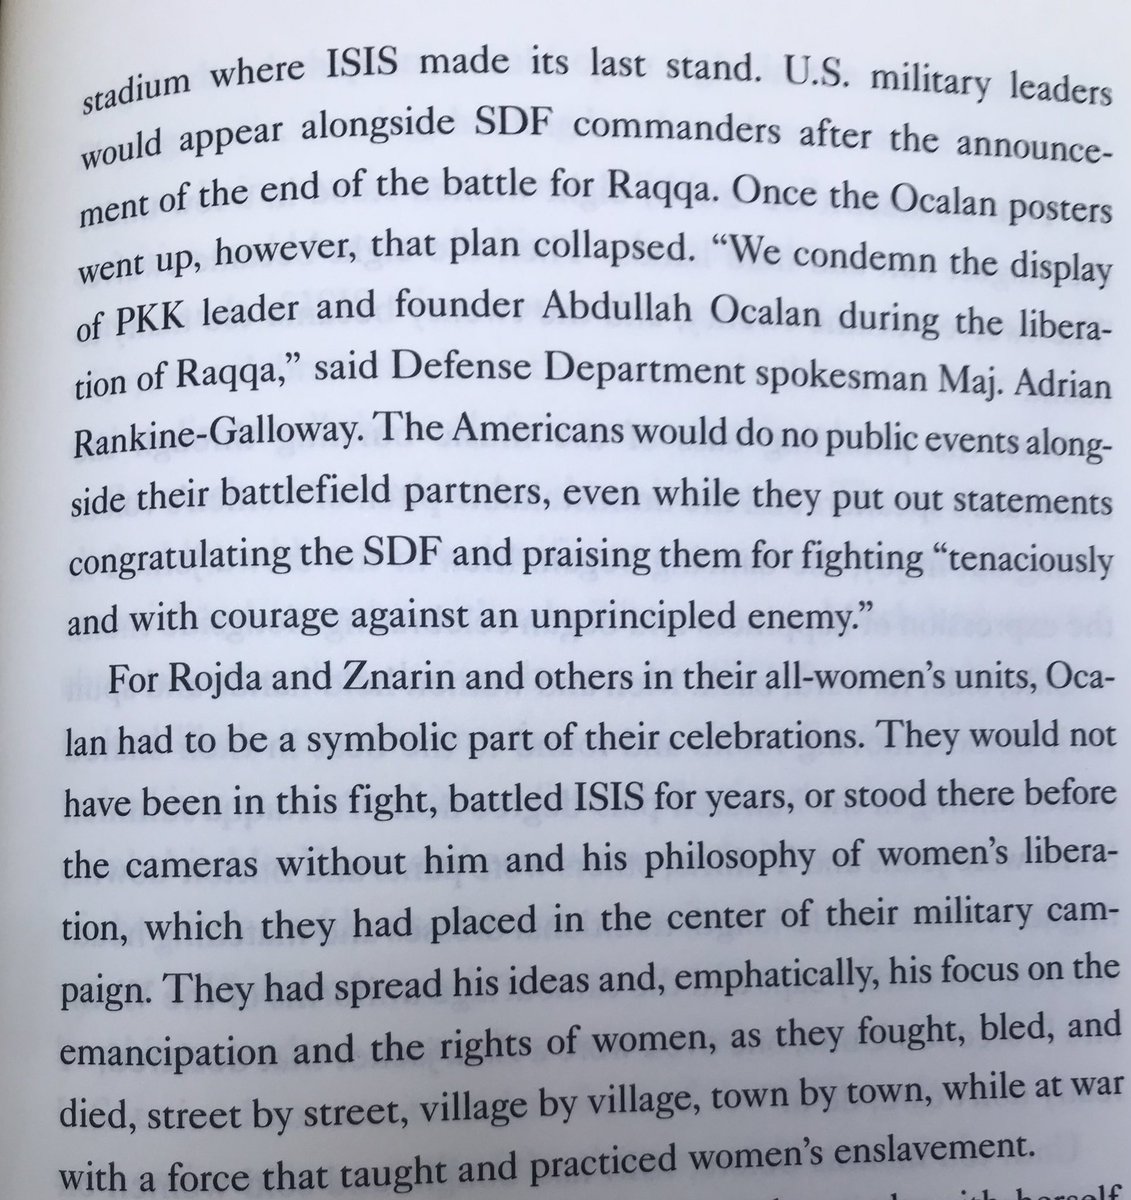 Pleasantly surprised by this very fair description of why the Ocalan flag was raised in Raqqa and why it mattered. Glad the author made a point of recognizing how his political philosophy underpinned the defeat of ISIS, regardless of US disapproval.